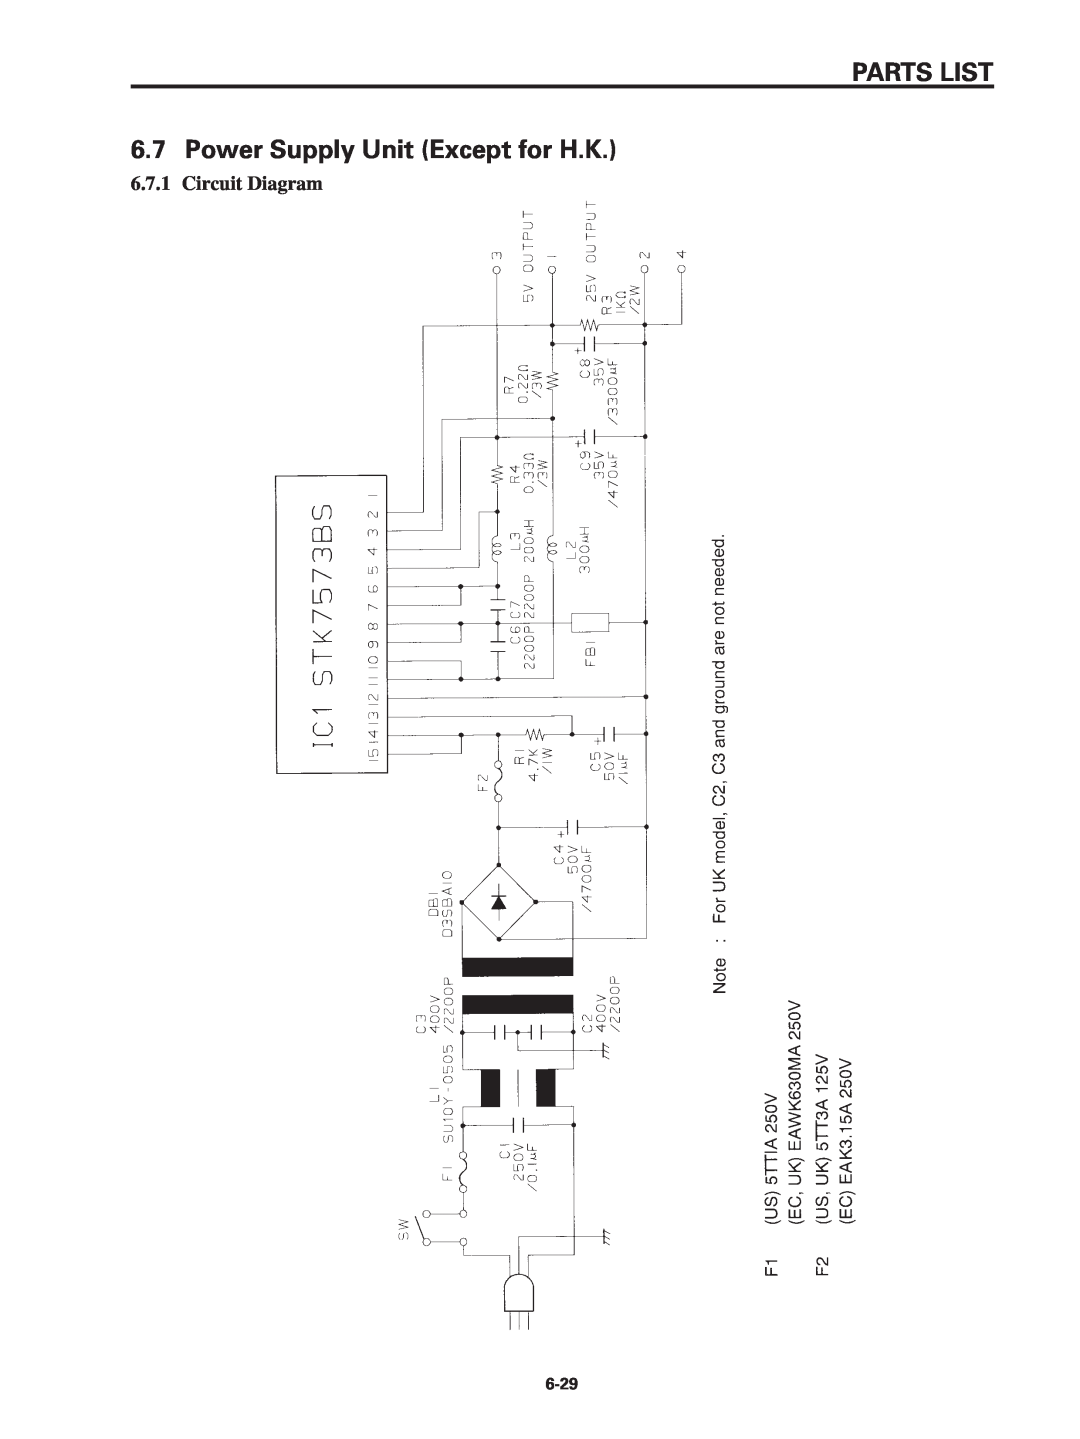 Star Micronics SP320S technical manual PARTS LIST 6.7 Power Supply Unit Except for H.K, Circuit Diagram 